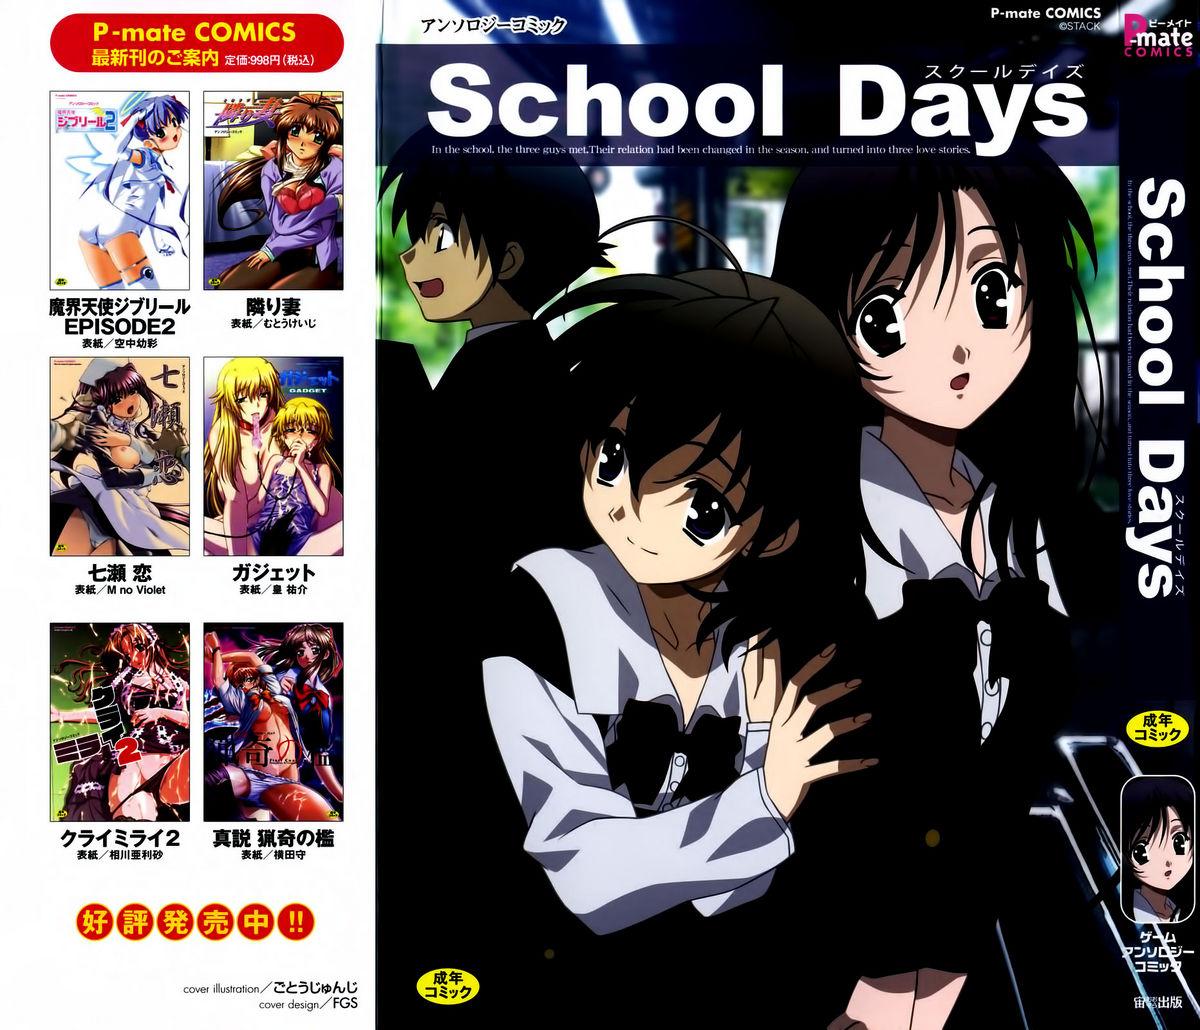 Clit School Days Anthology - School days Indonesian - Picture 1